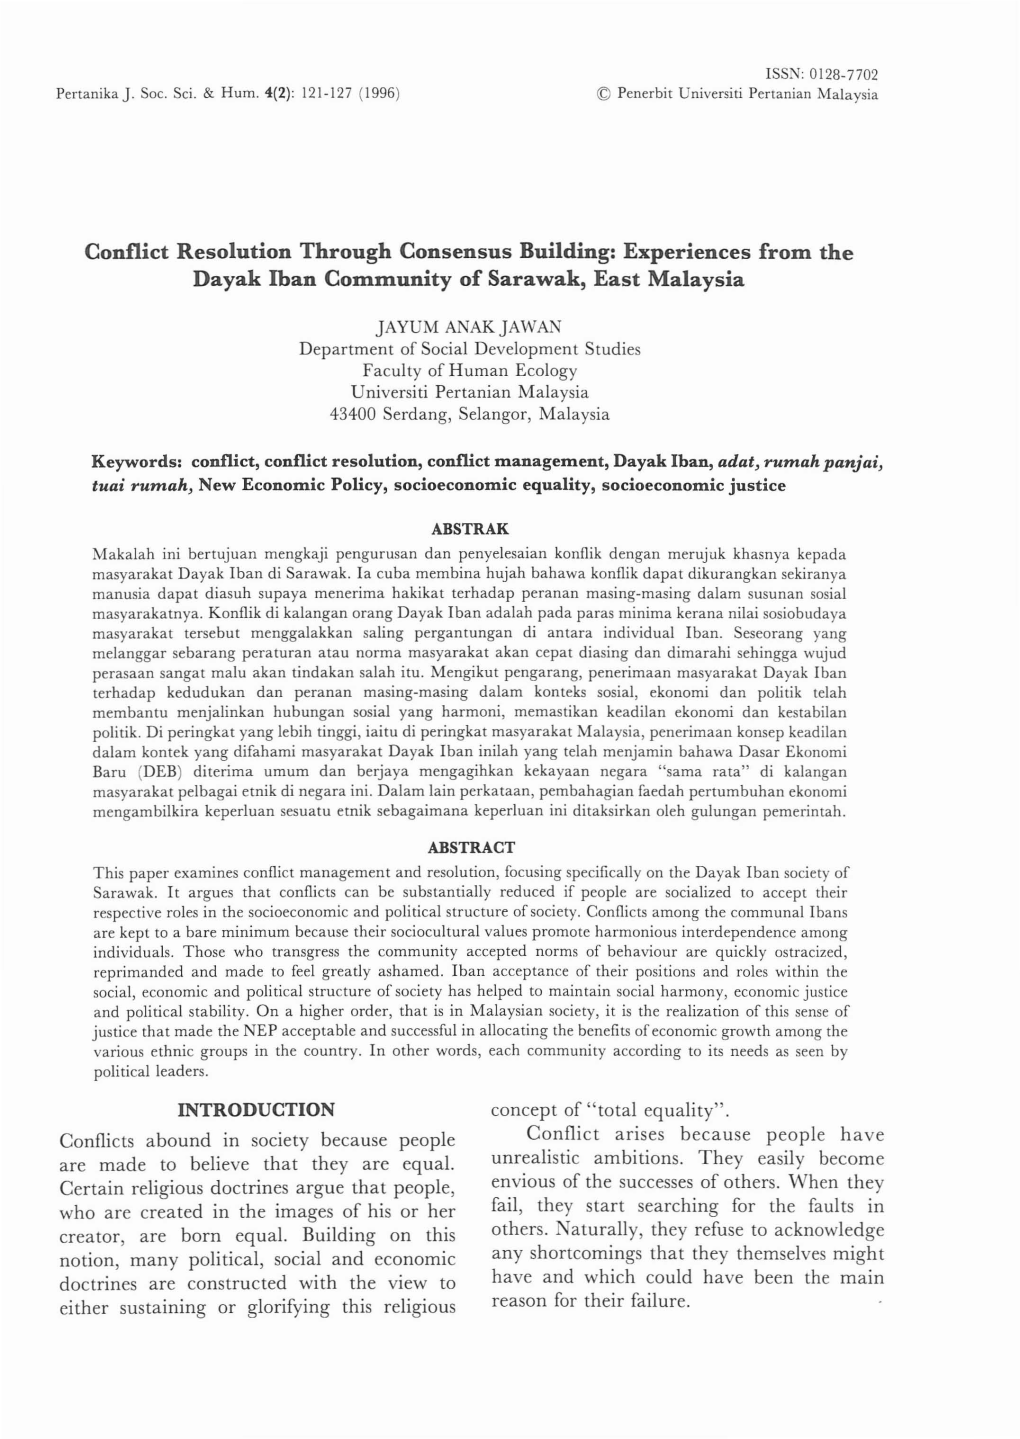 Conflict Resolution Through Consensus Building: Experiences from the Dayak Than Community of Sarawak, East Malaysia